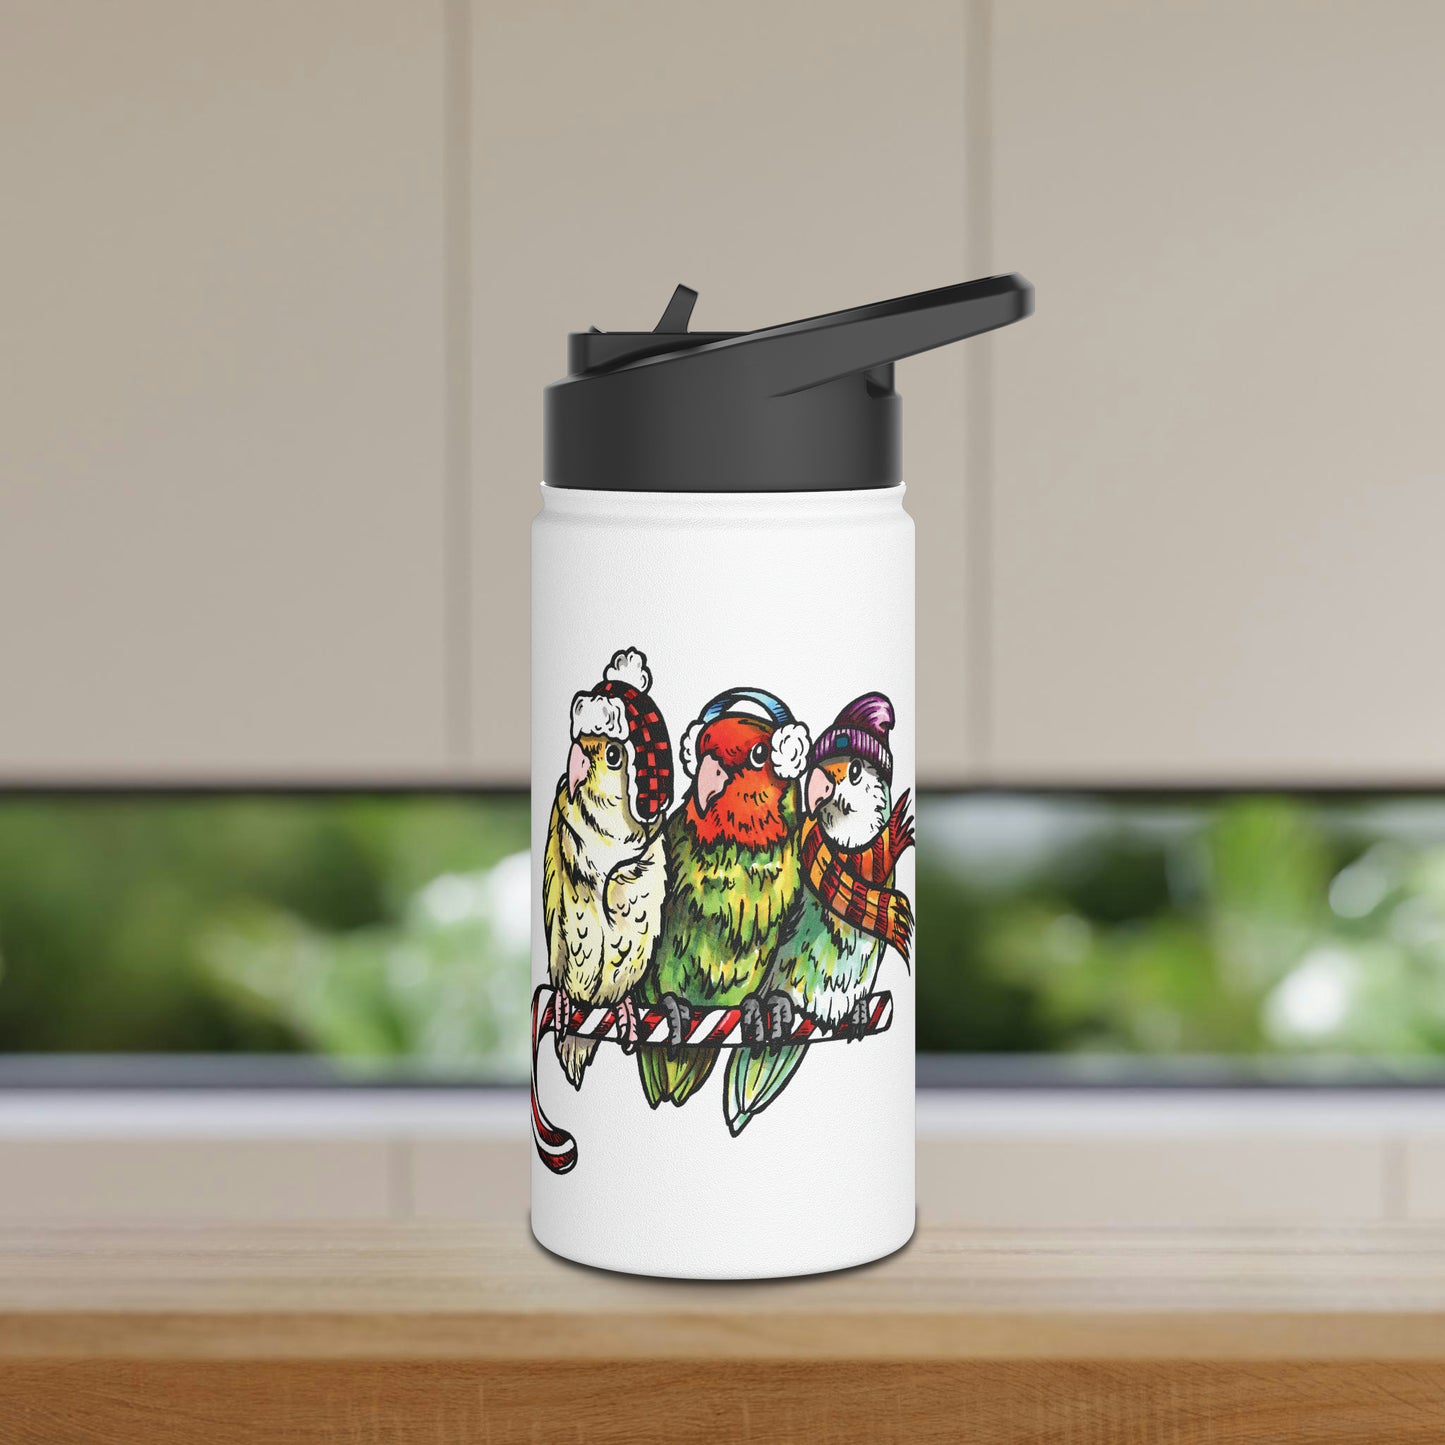 3 Lovebirds in Winter Wear & Perched on a Candy Cane, Stainless-Steel BPA-Free Water Bottle with Built-In Straw